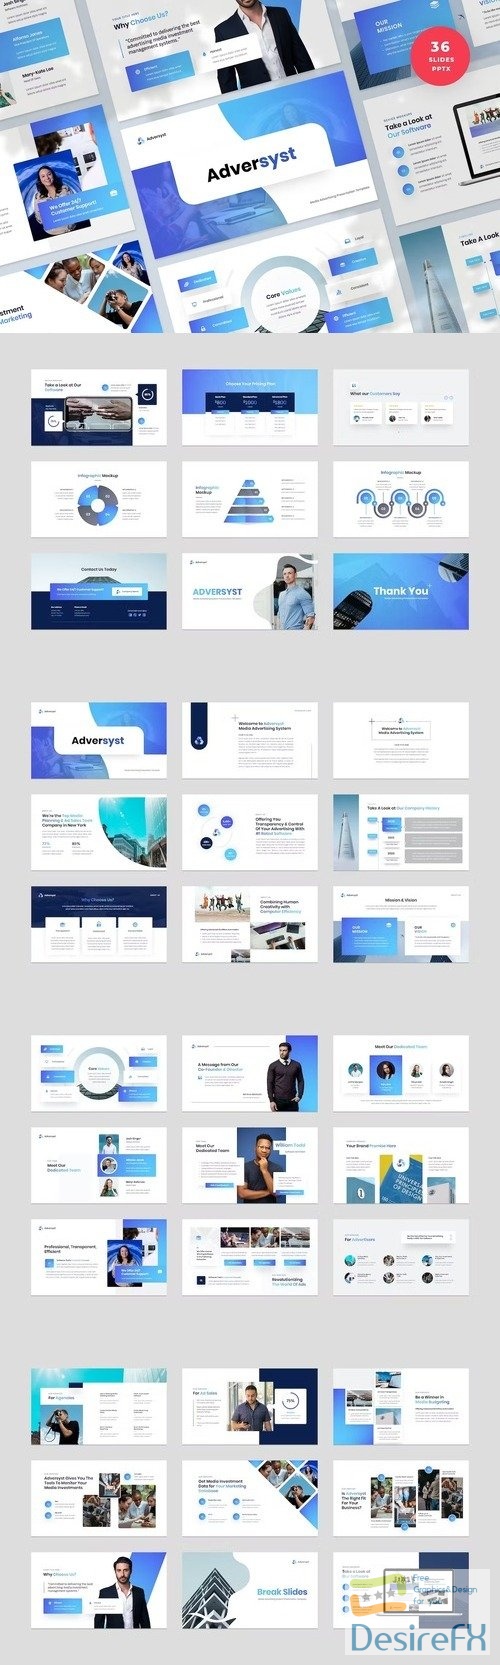 Media Advertising System PowerPoint Template